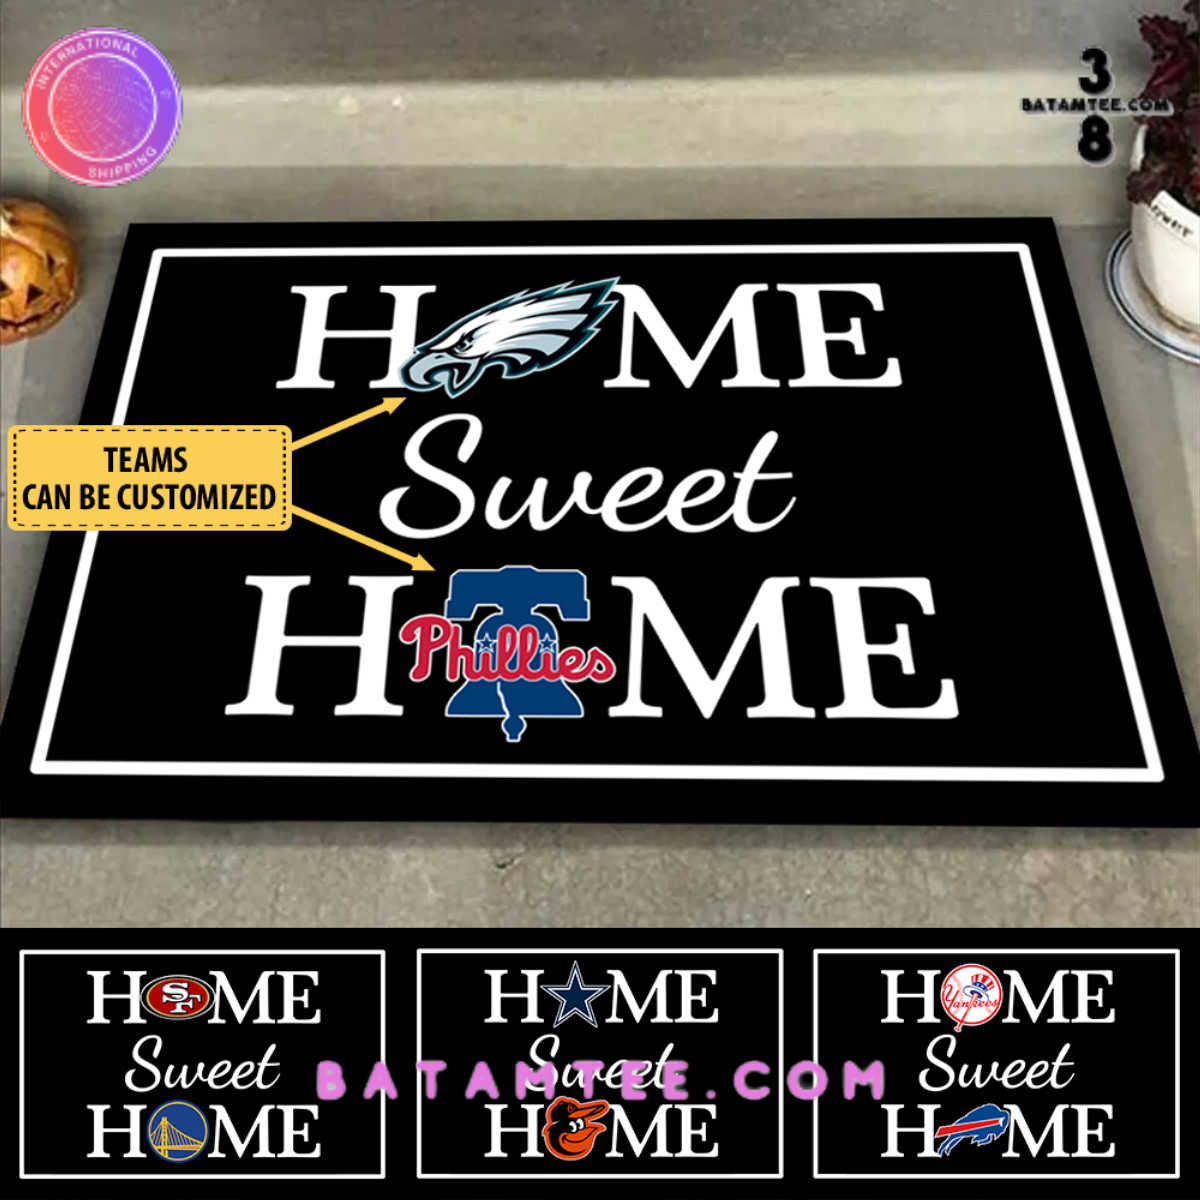 Home Sweet Home Customized NFL Teams  Anti Slip Indoor Doormat's Overview - Batamtee Shop - Threads & Totes: Your Style Destination